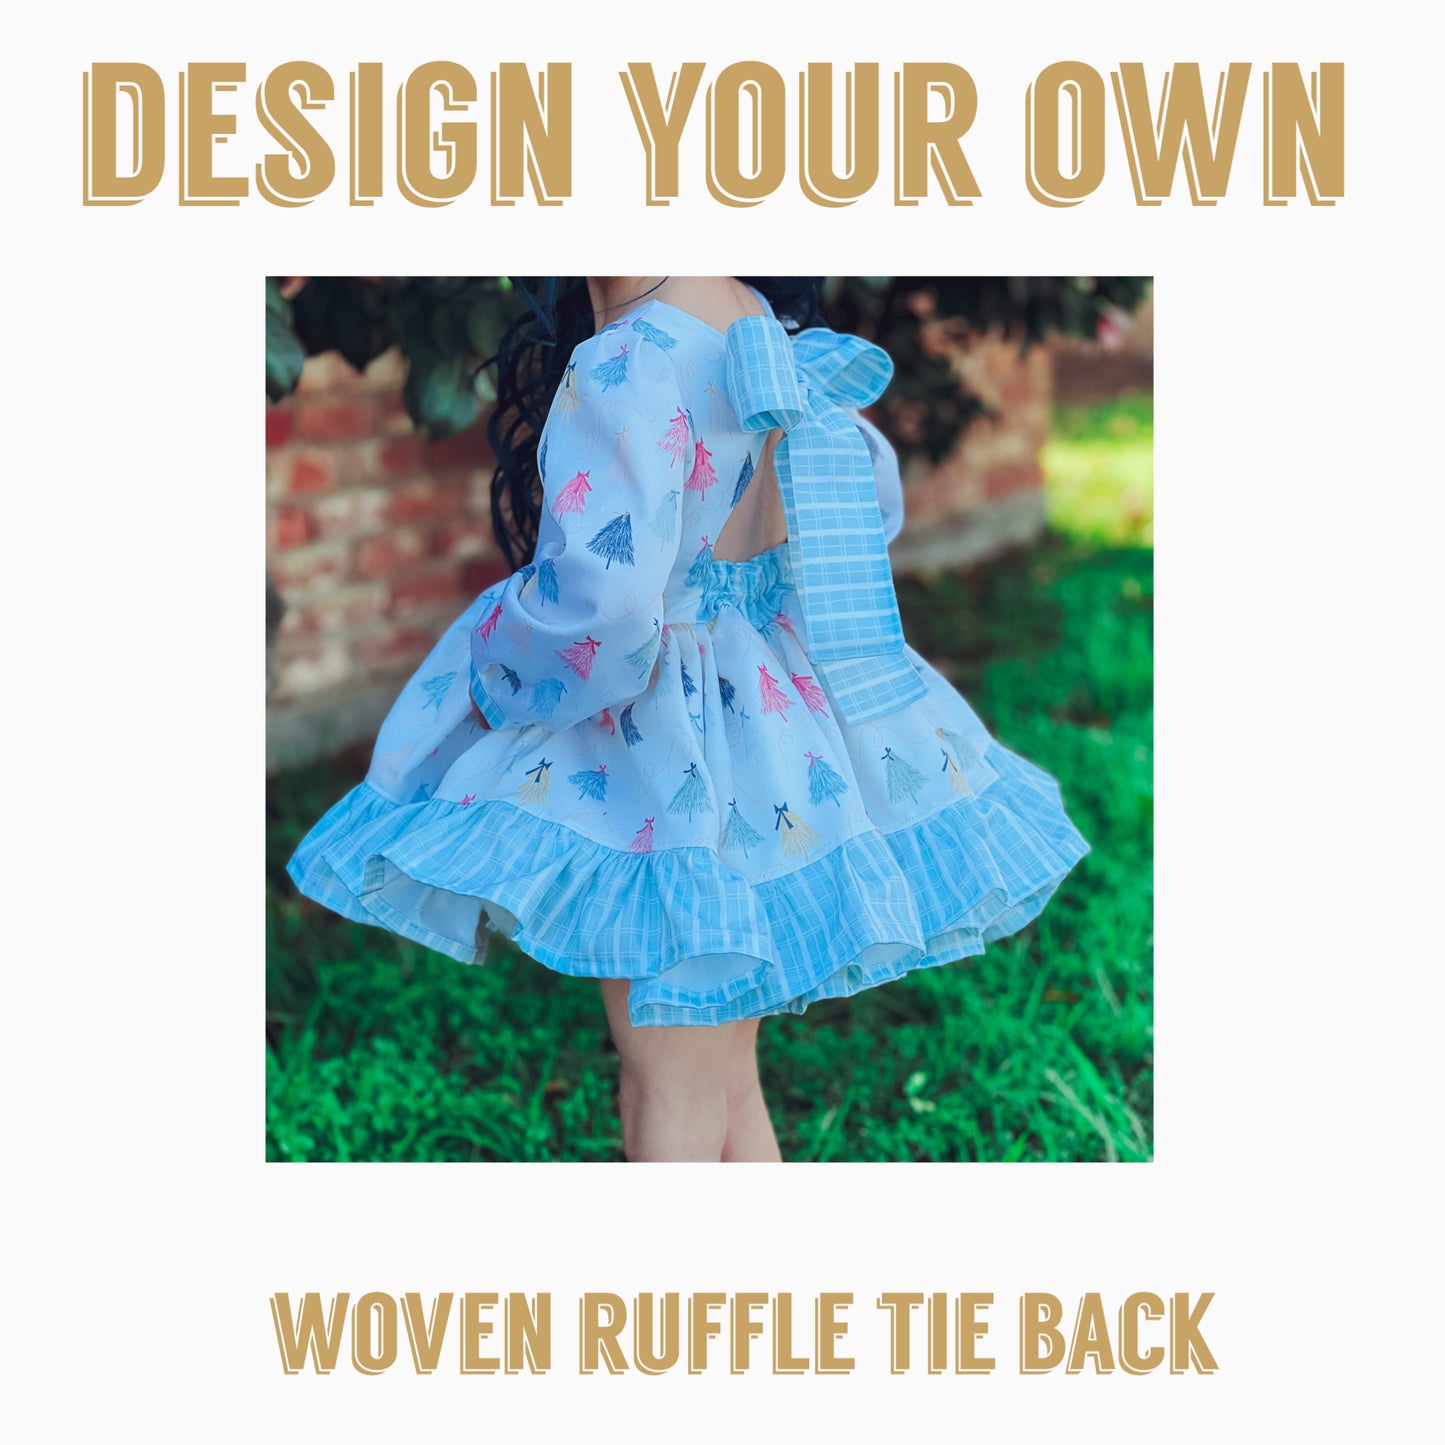 Design your own | Ruffle tie back Woven Dress